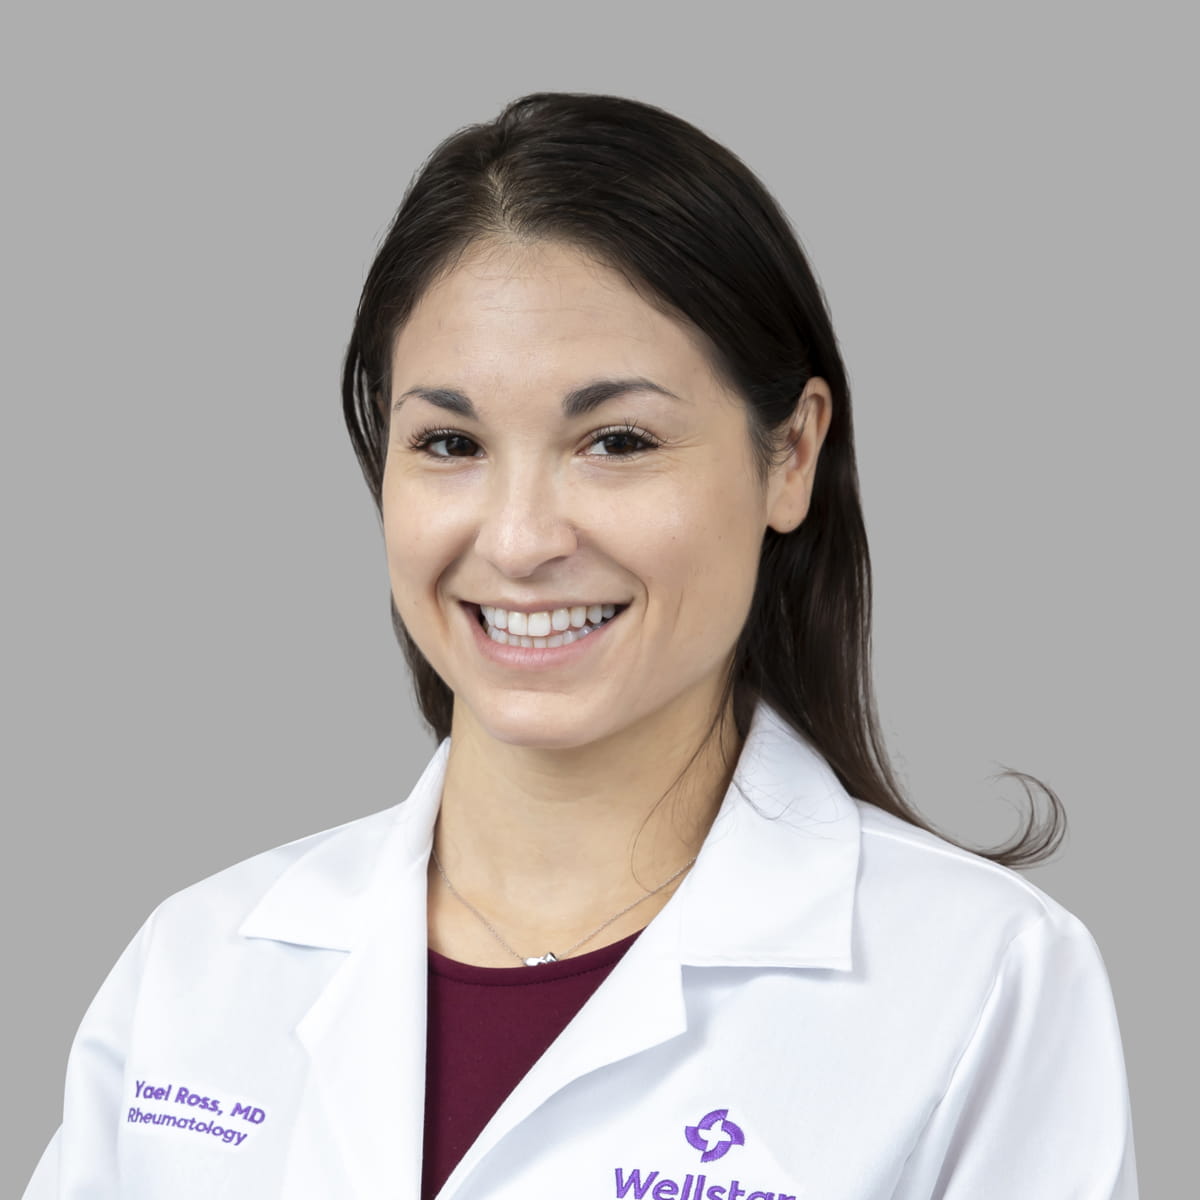 A friendly image of Yael Ross MD